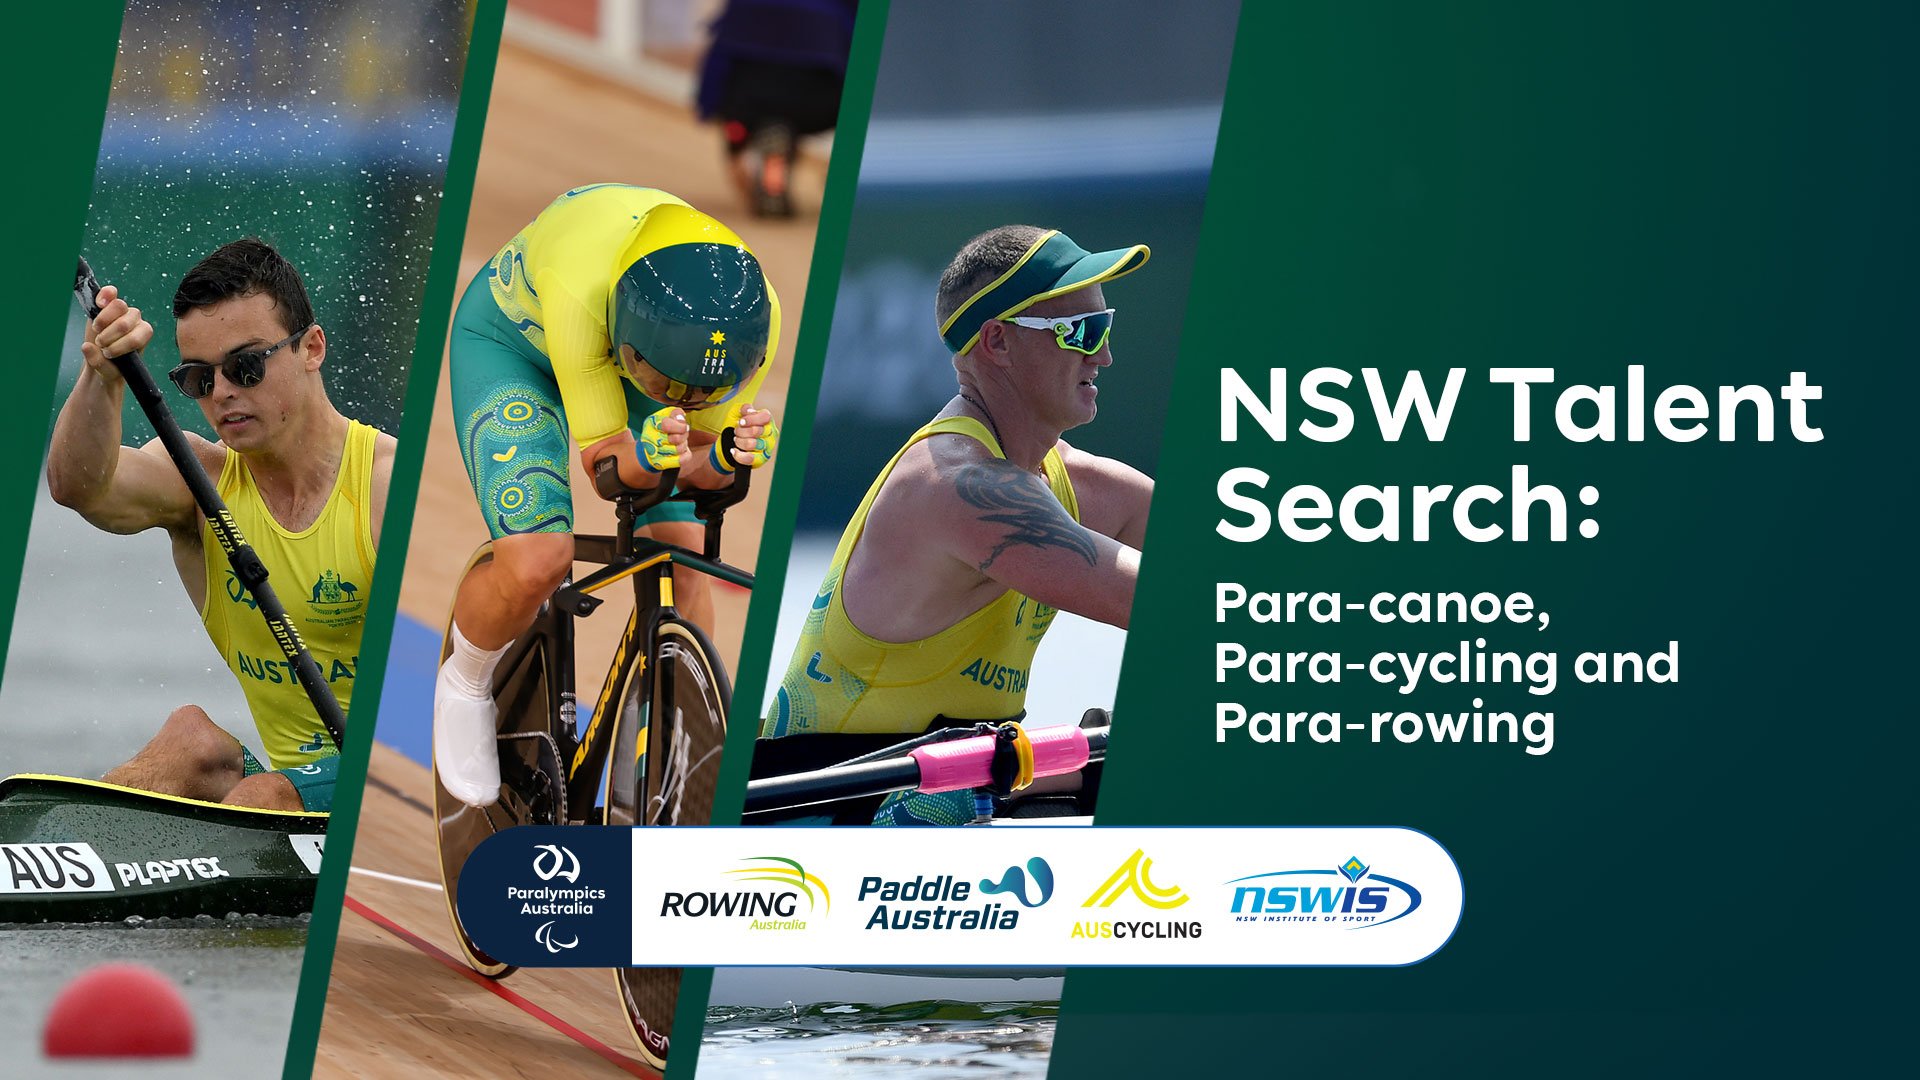 Text on image reads: NSW Talent Search: Para-canoe, Para-cycling, Para-rowing